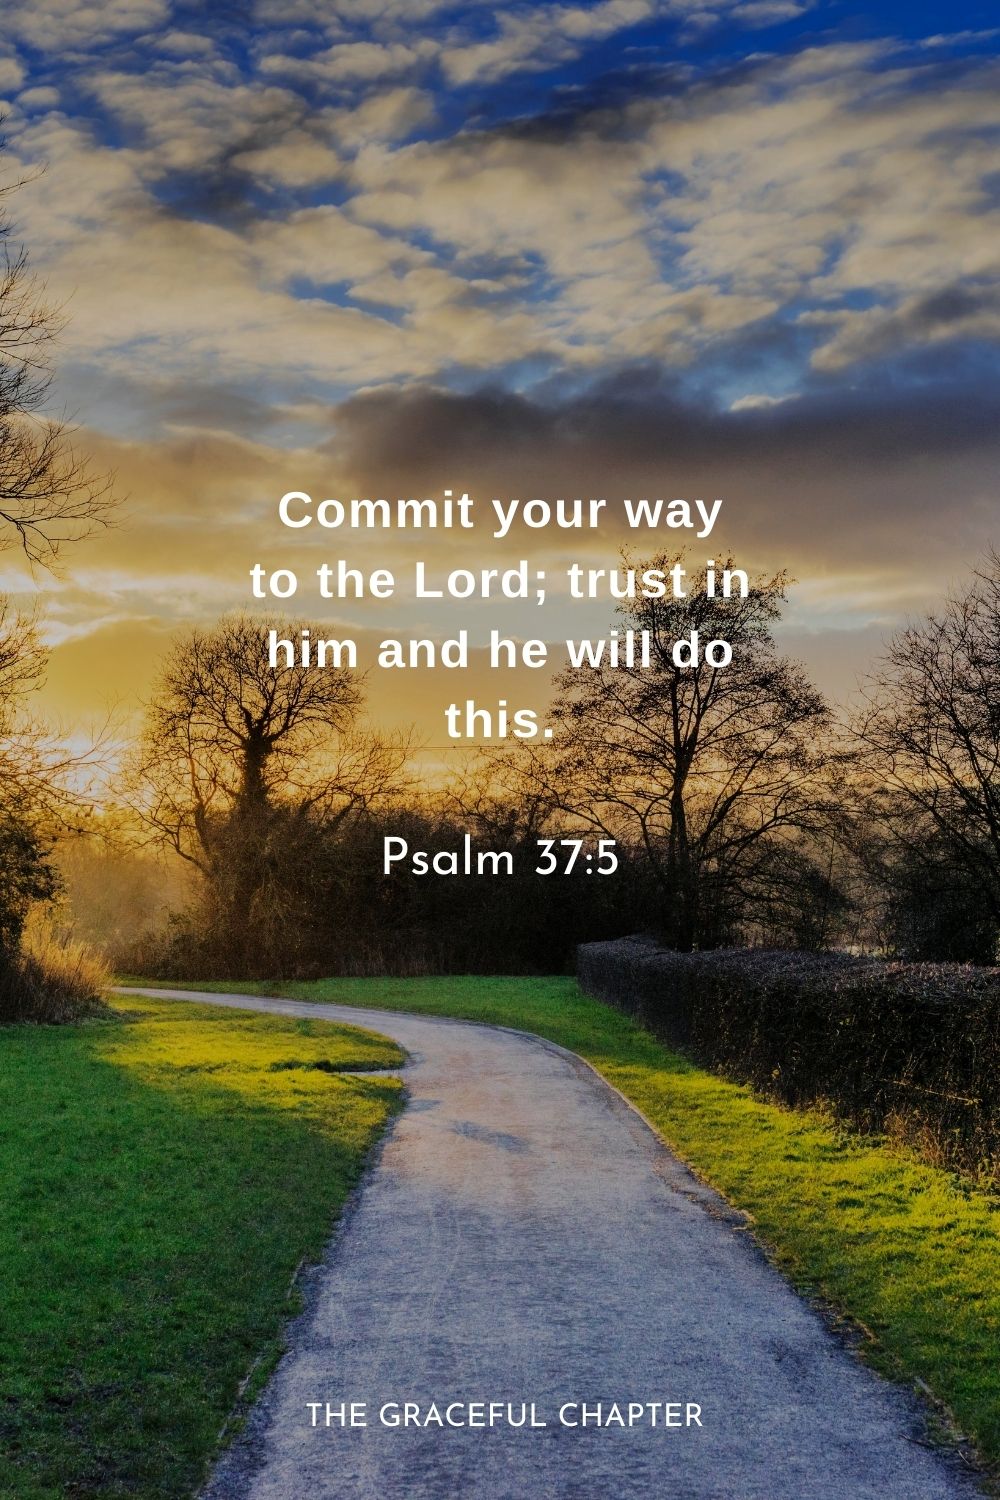 Commit your way to the Lord; trust in him and he will do this.